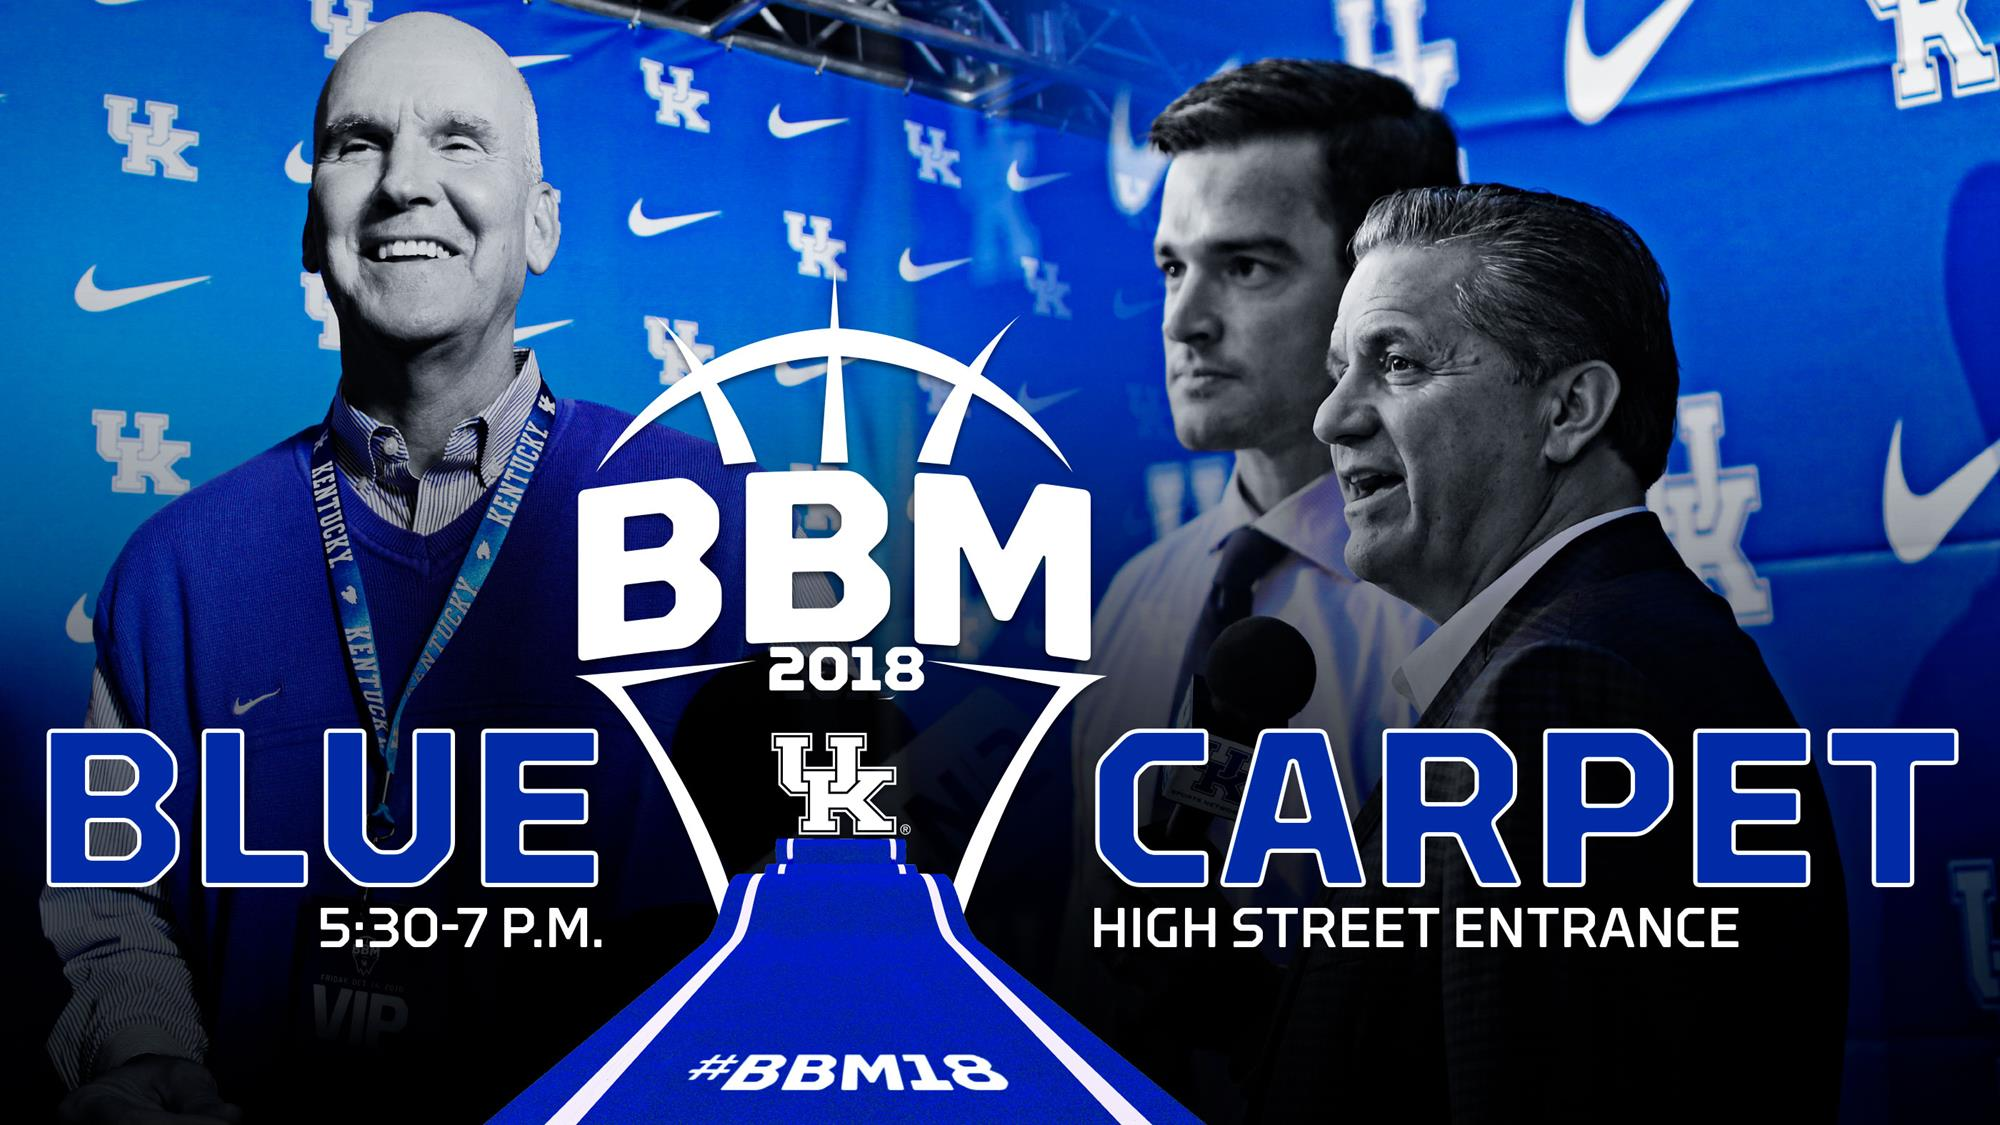 #BBM18 Presented by Papa John’s to Feature Don Franklin Auto Blue Carpet Entrance